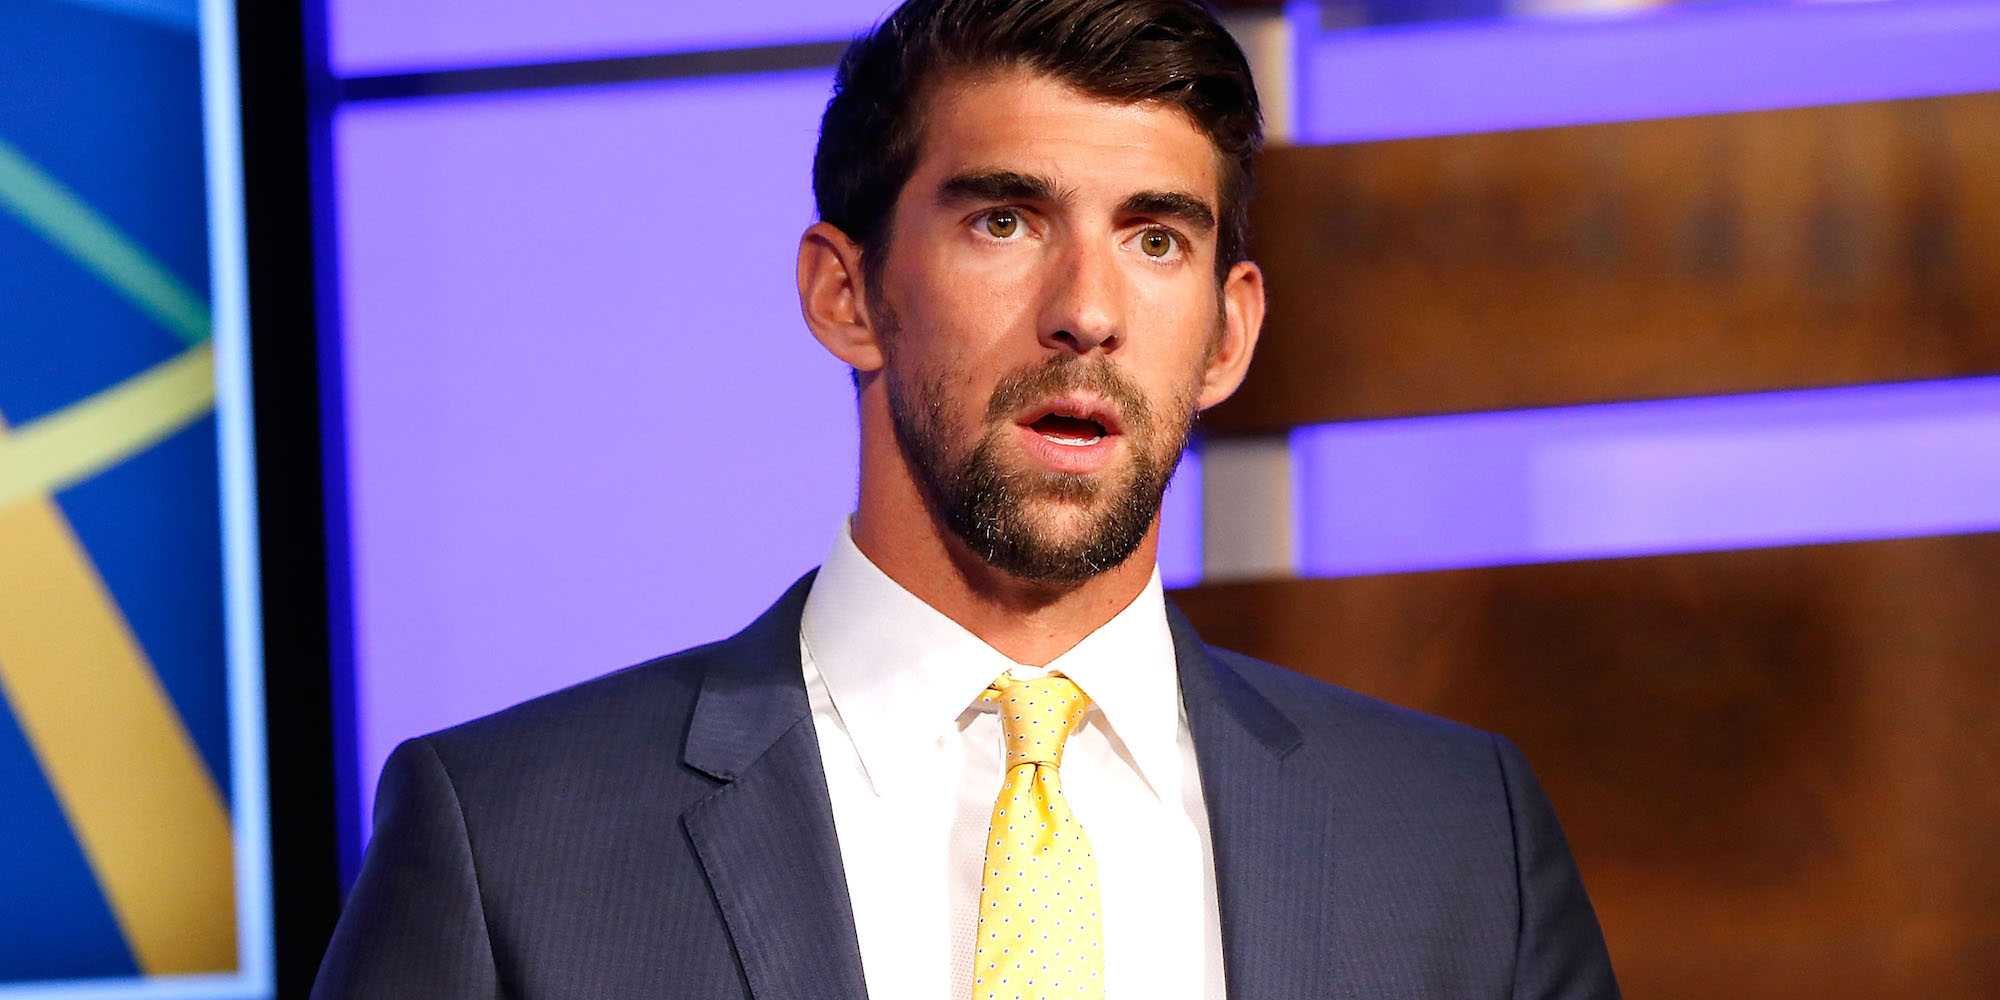 Phelps says he has no plans to return to competition